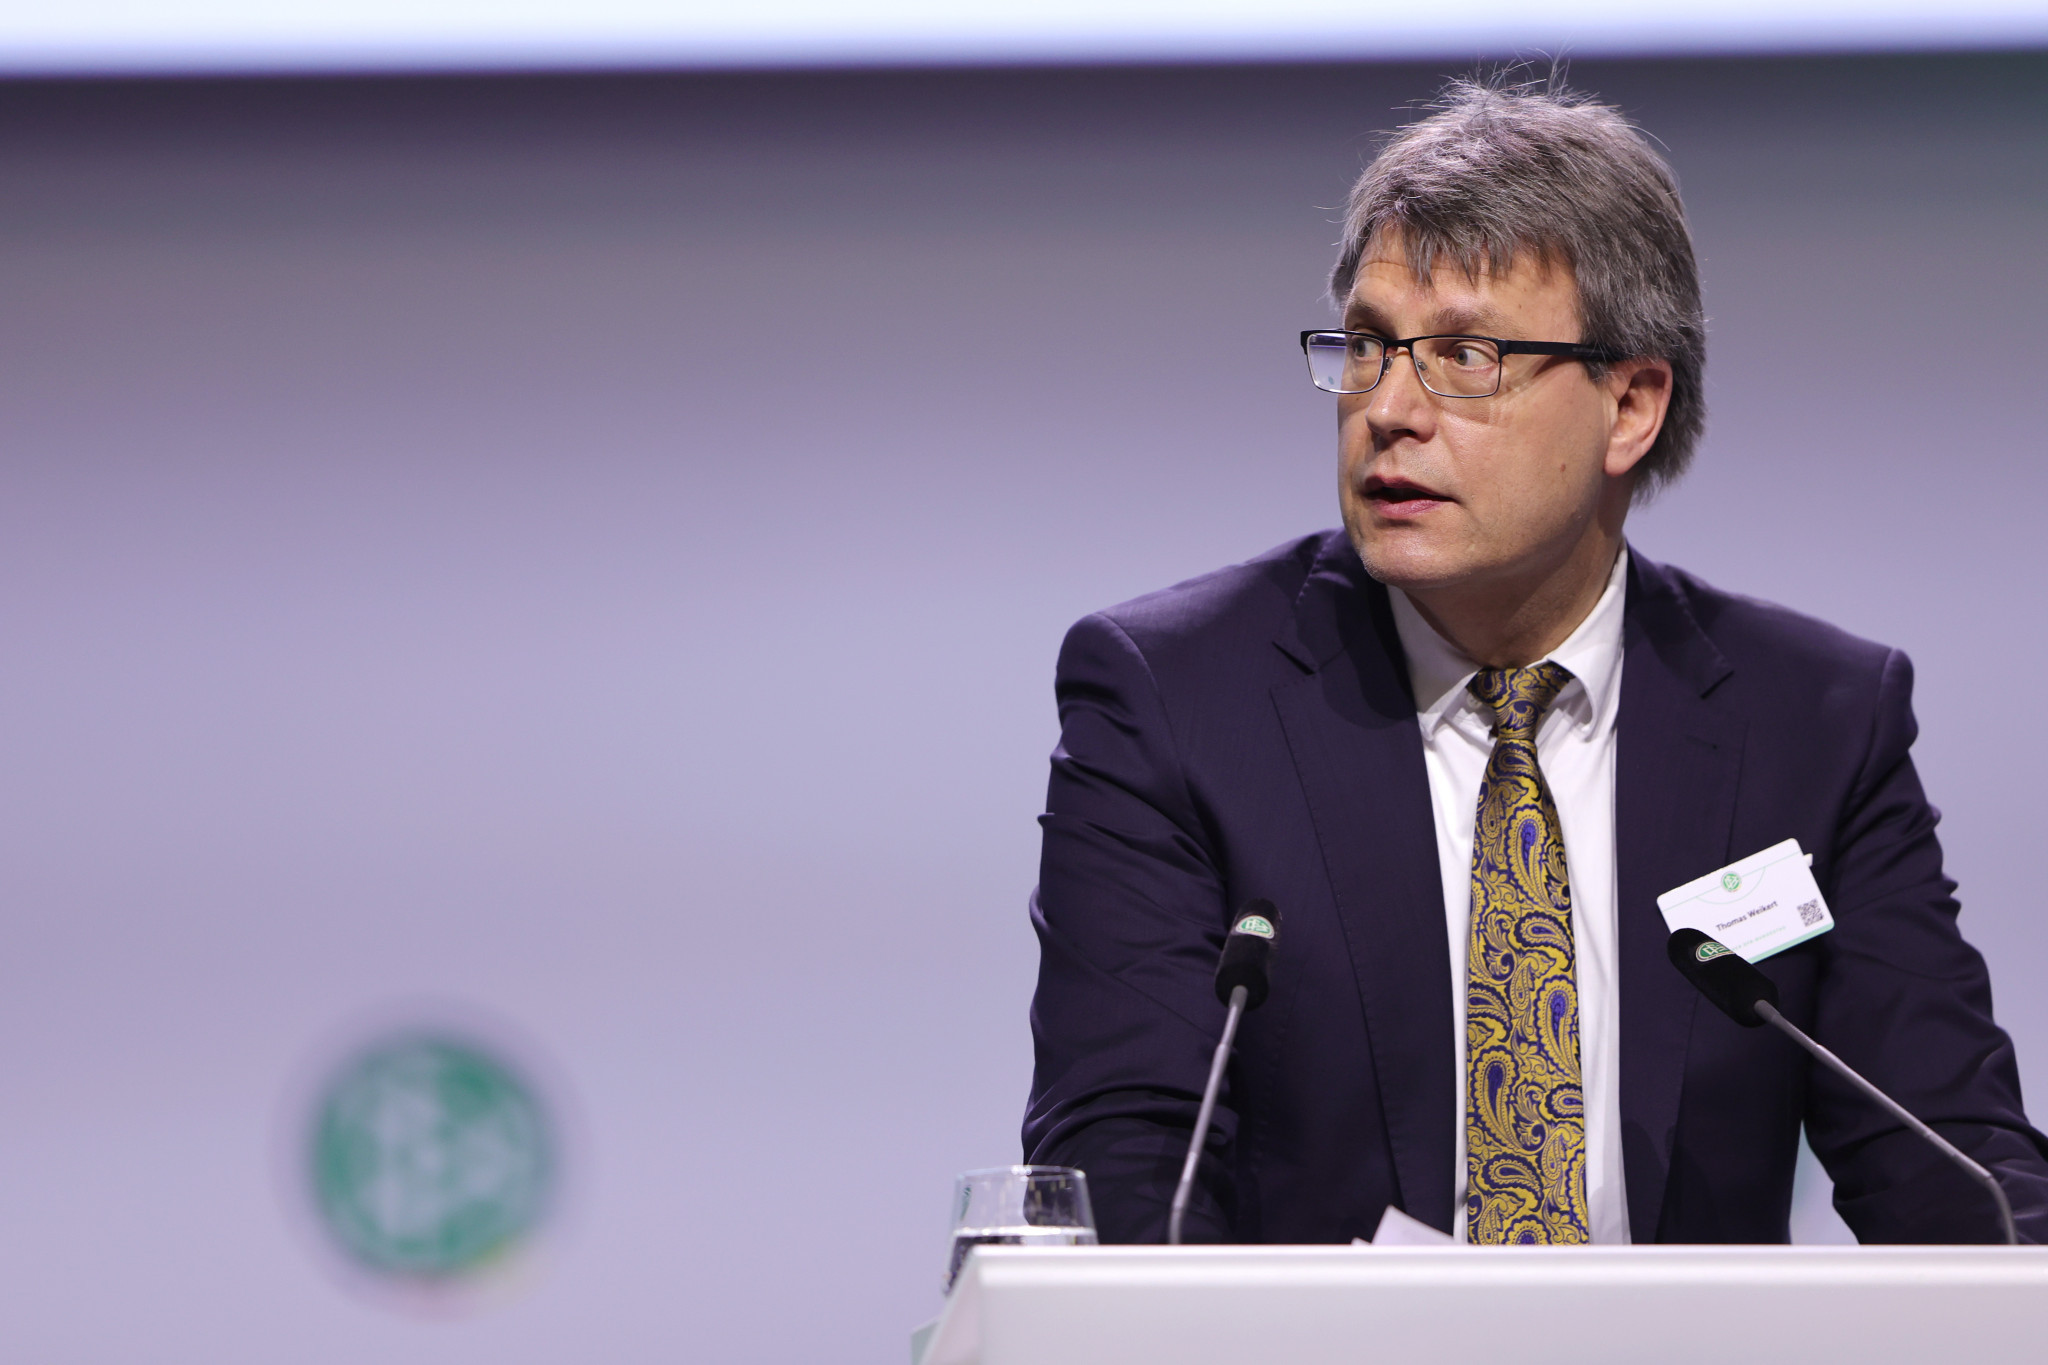 Thomas Weikert is the President of the DOSB. © Getty Images